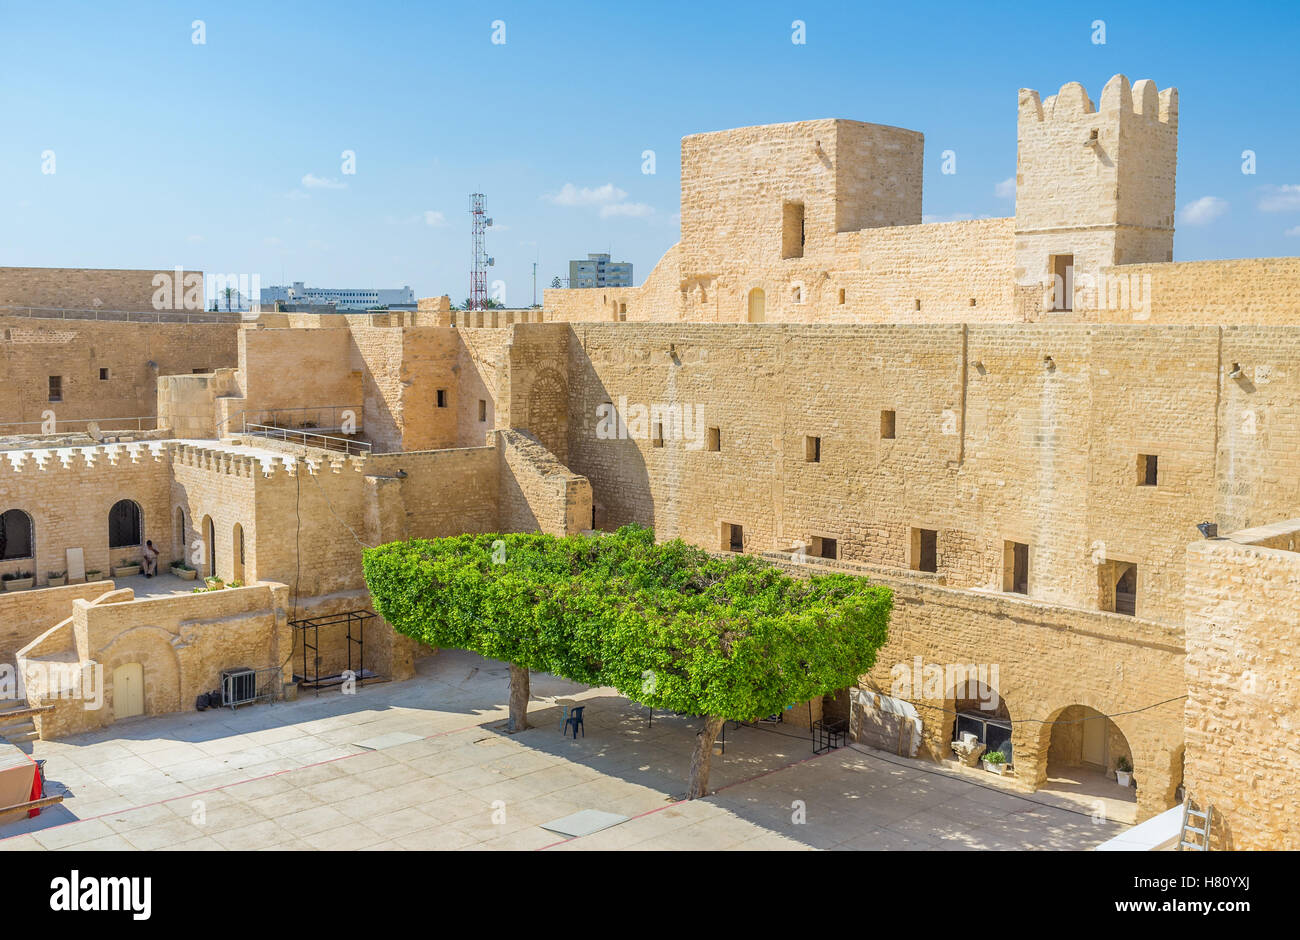 Nowadays the old stronghold serves as the museum, Monastir, Tunisia. Stock Photo